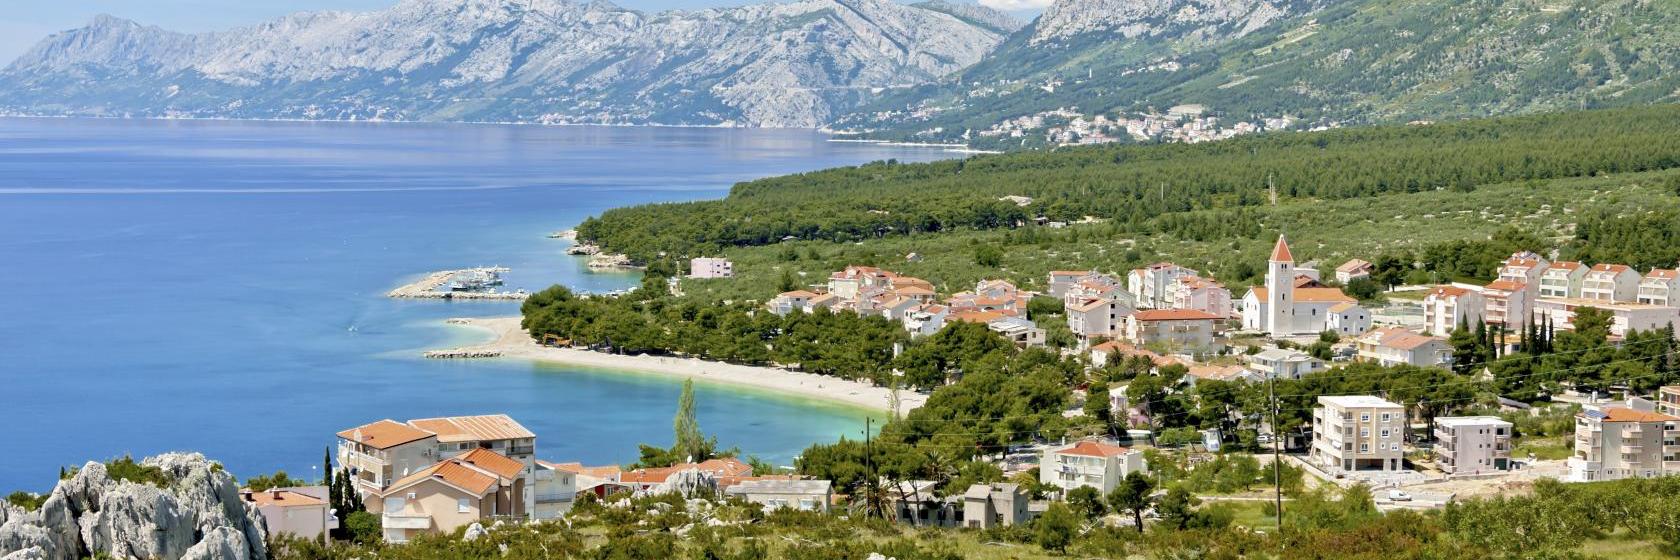 The 10 best hotels & places to stay in Promajna, Croatia - Promajna hotels